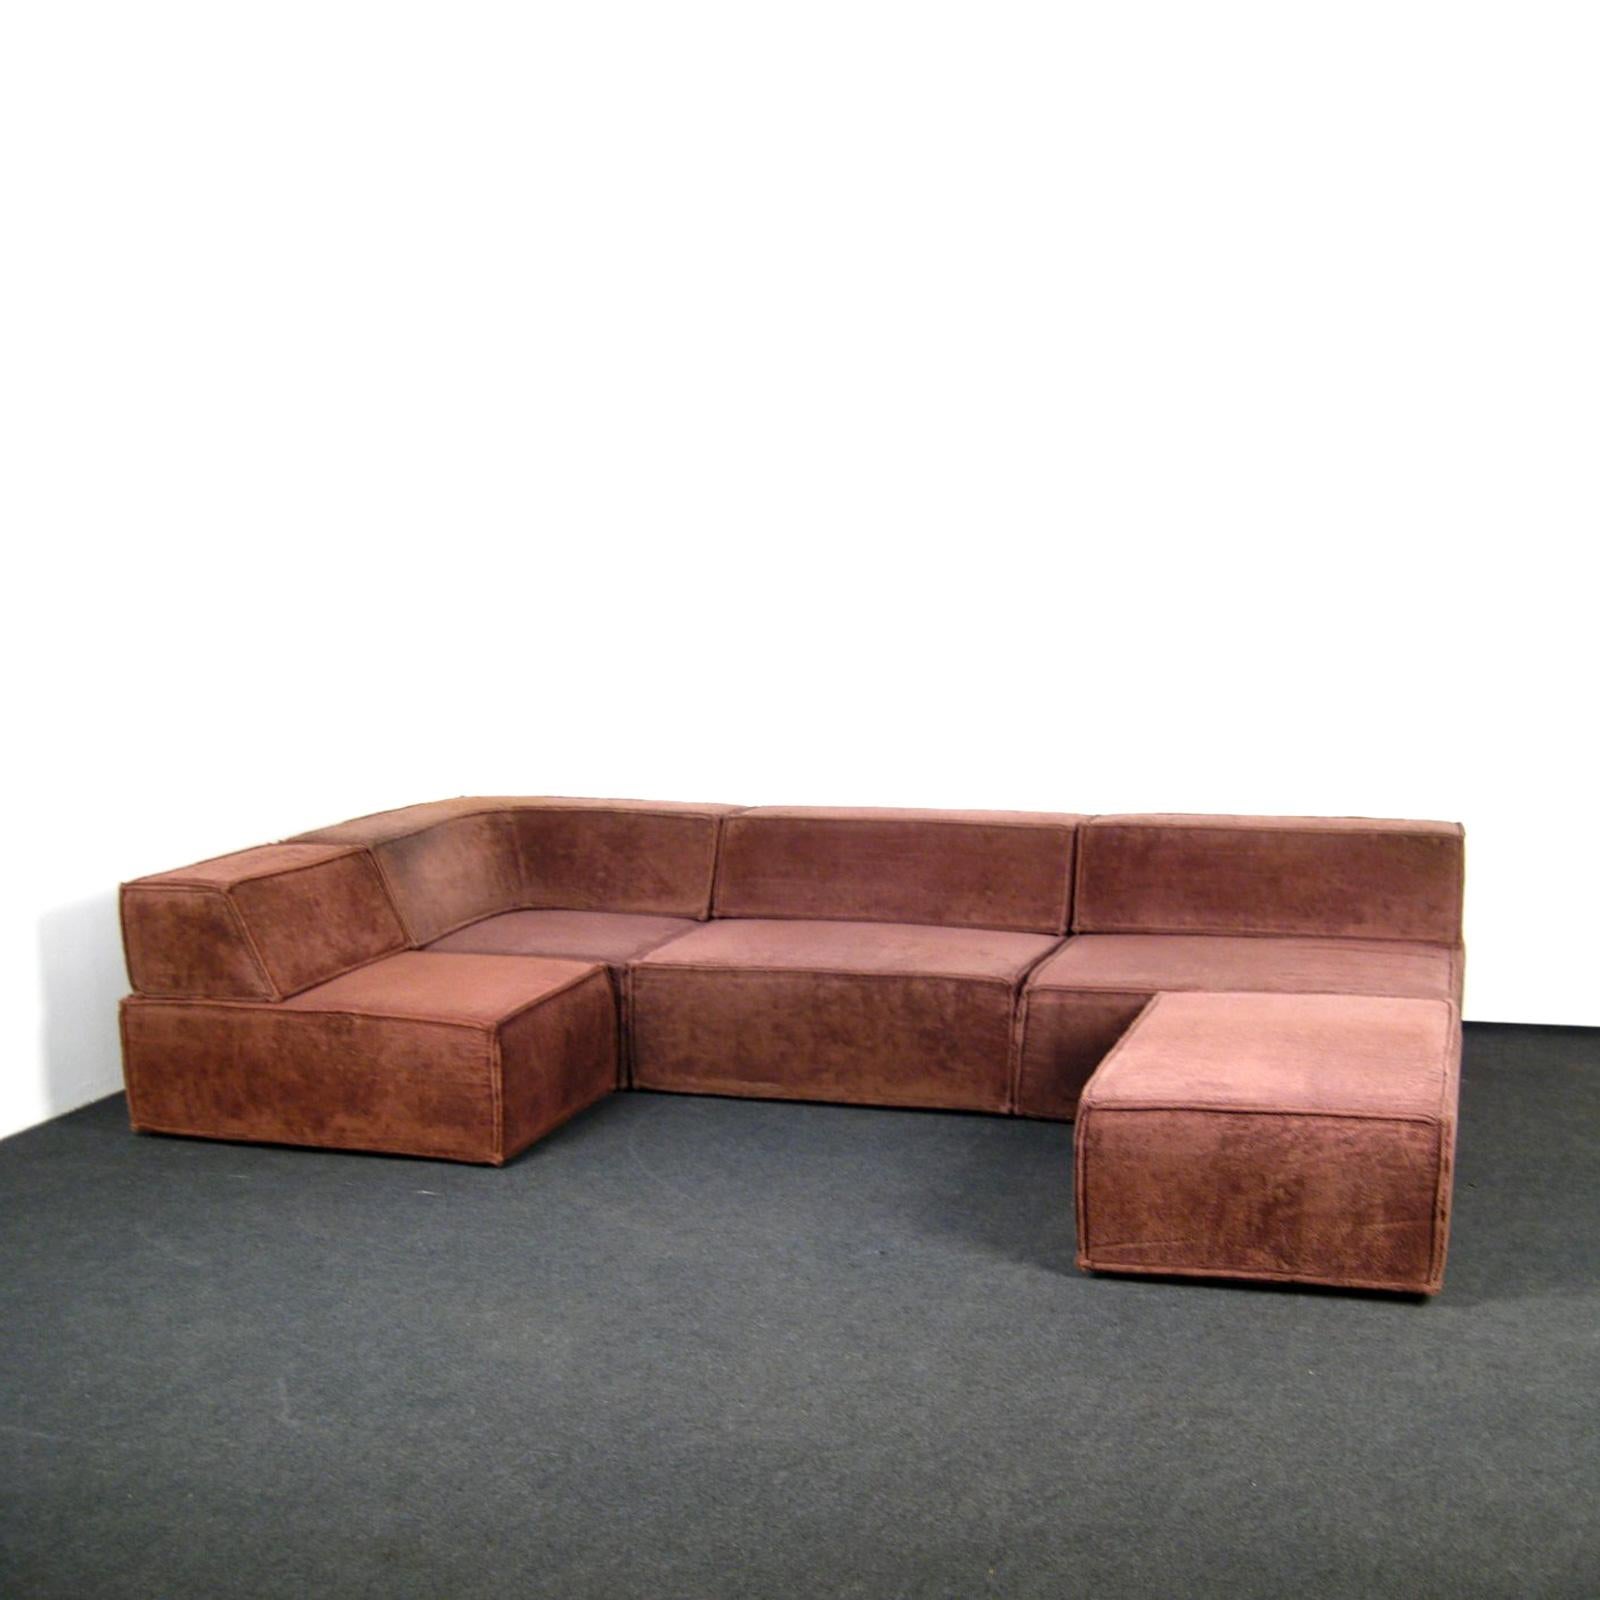 Wonderful seat-scape modules 'Trio Sofa' by Team Form AG for COR, designed and produced in 1972 with brown/burnt orange upholstery. The set consists of three base modules with two straight and one angular back rests (37.5